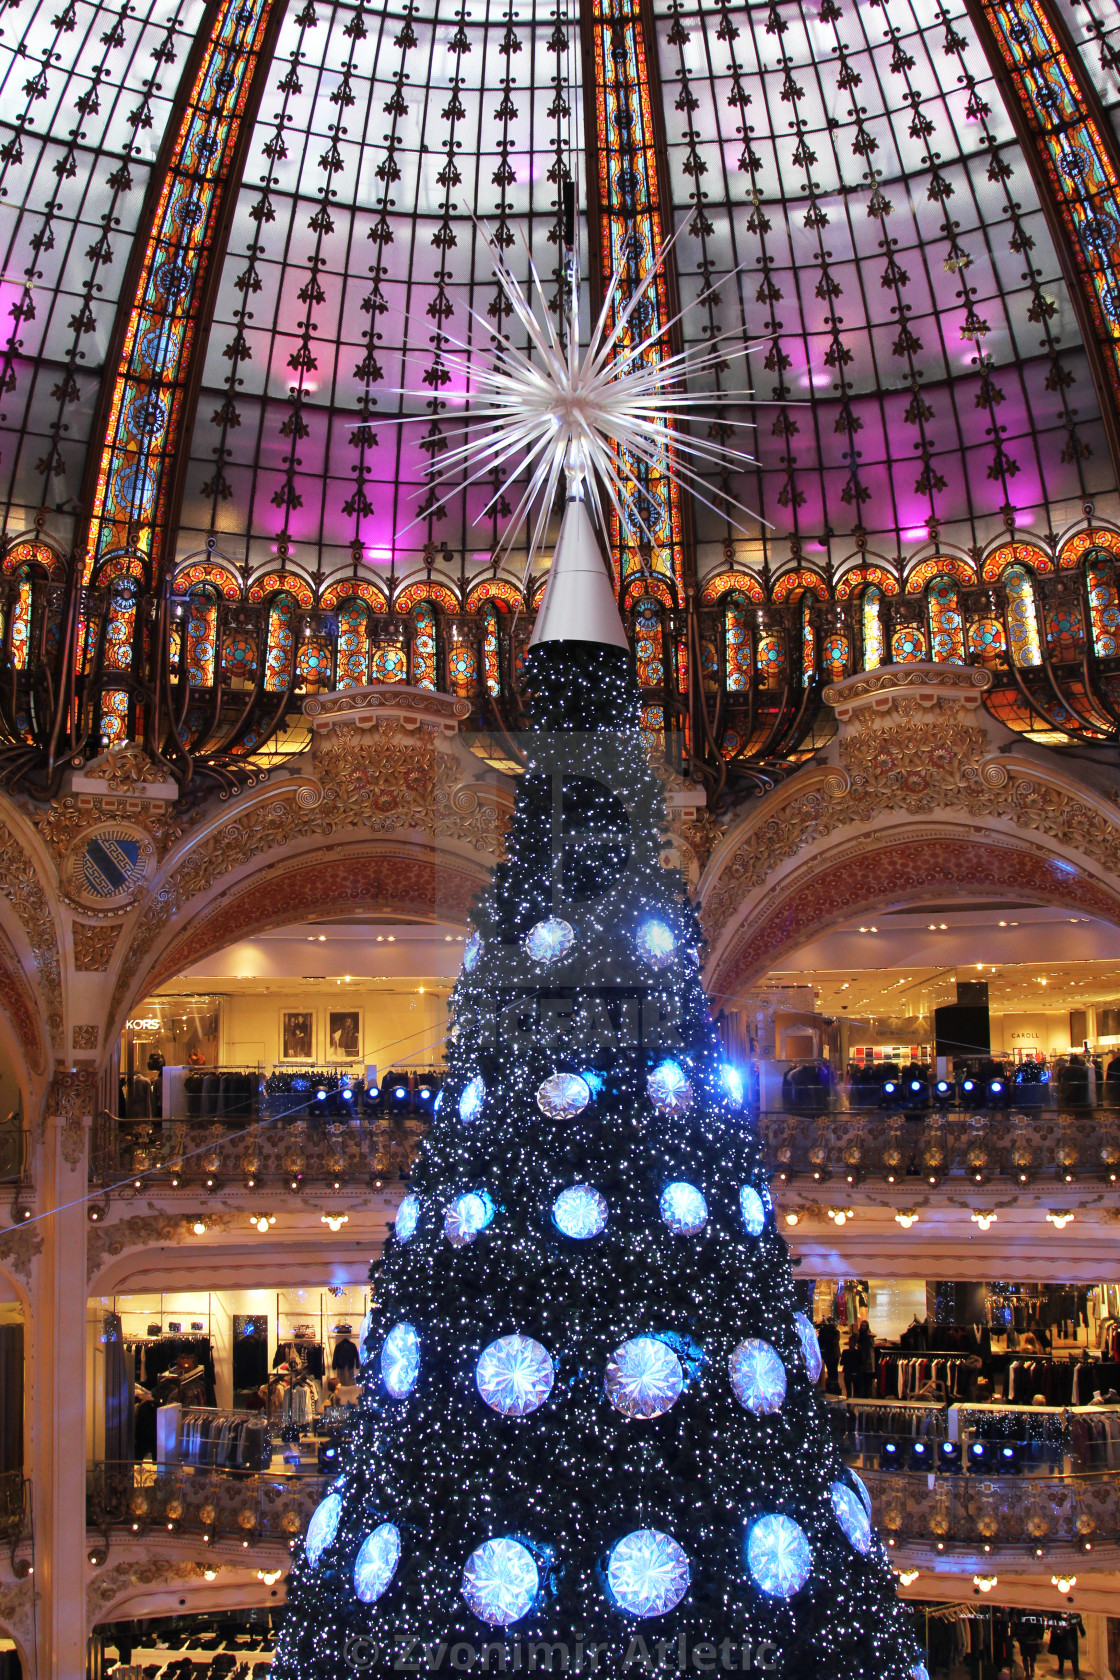 Galeries Lafayette by Night, Paris, France Editorial Image - Image